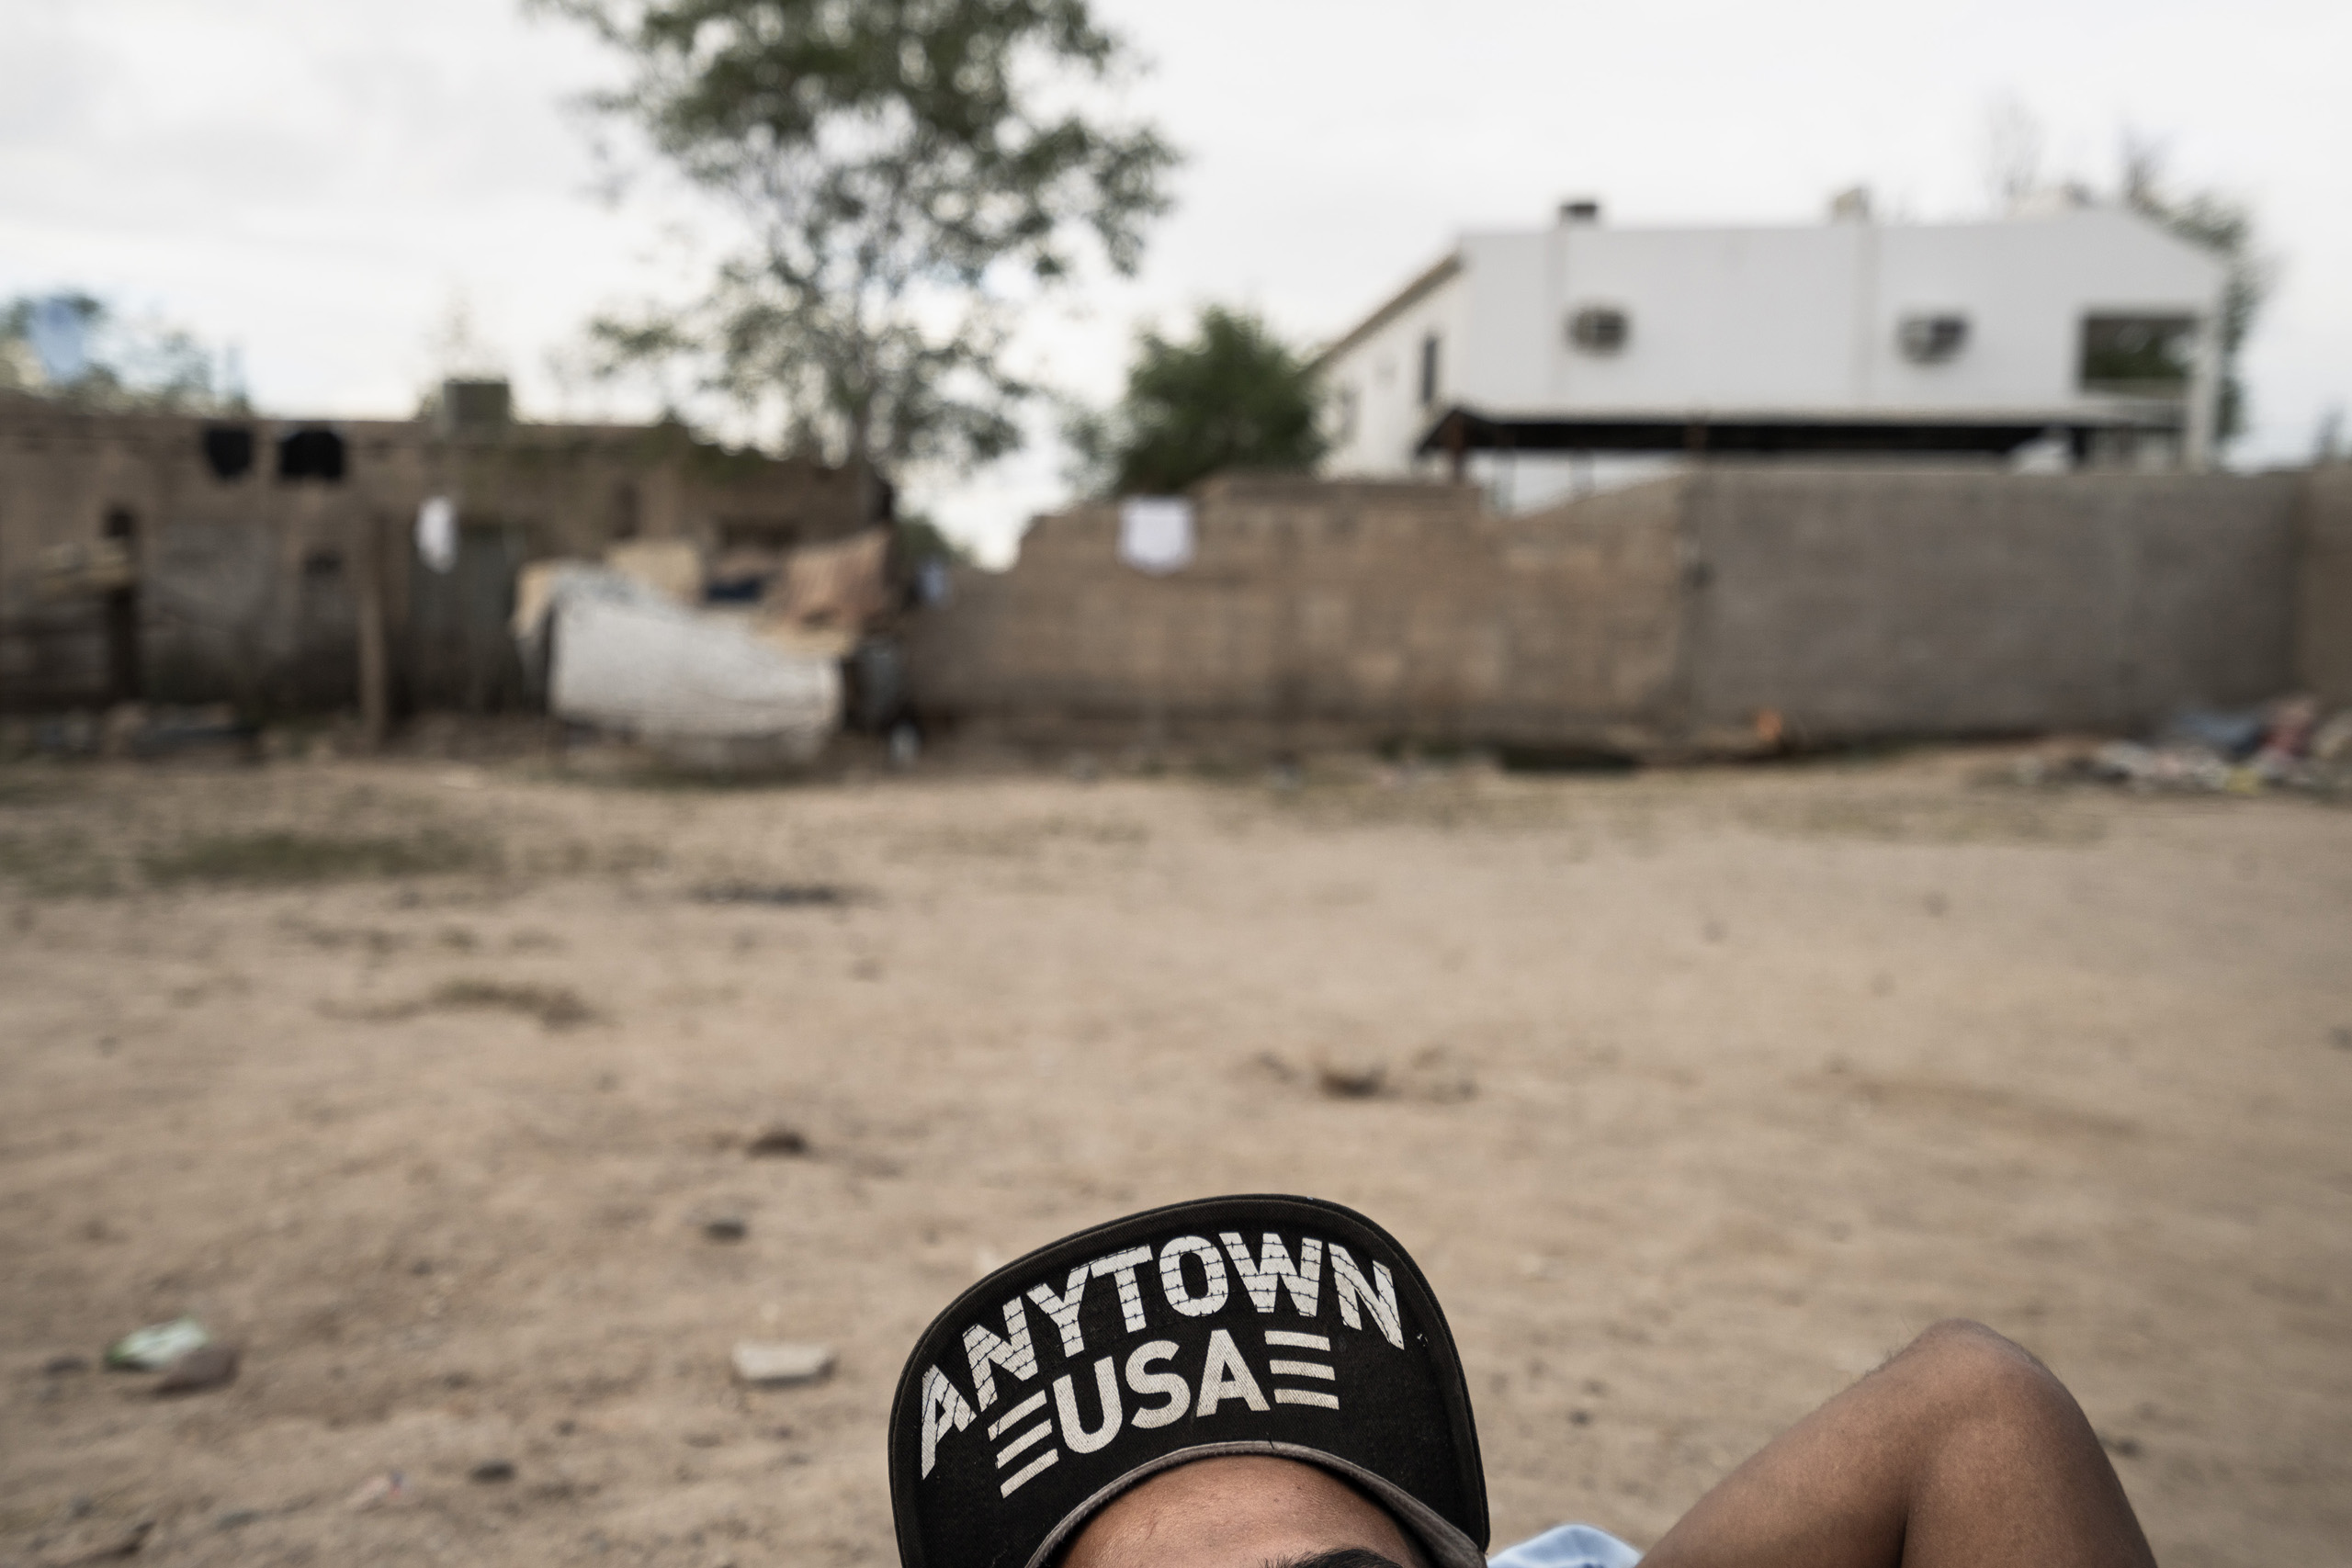 An illegal Central American migrant rests on the ground at an immigrant shelter in Caborca, a town in the state of Sonora, Mexico. His hat reads:  Anytown US.  Caborca, Sonora, Mexico. Oct. 7, 2016.